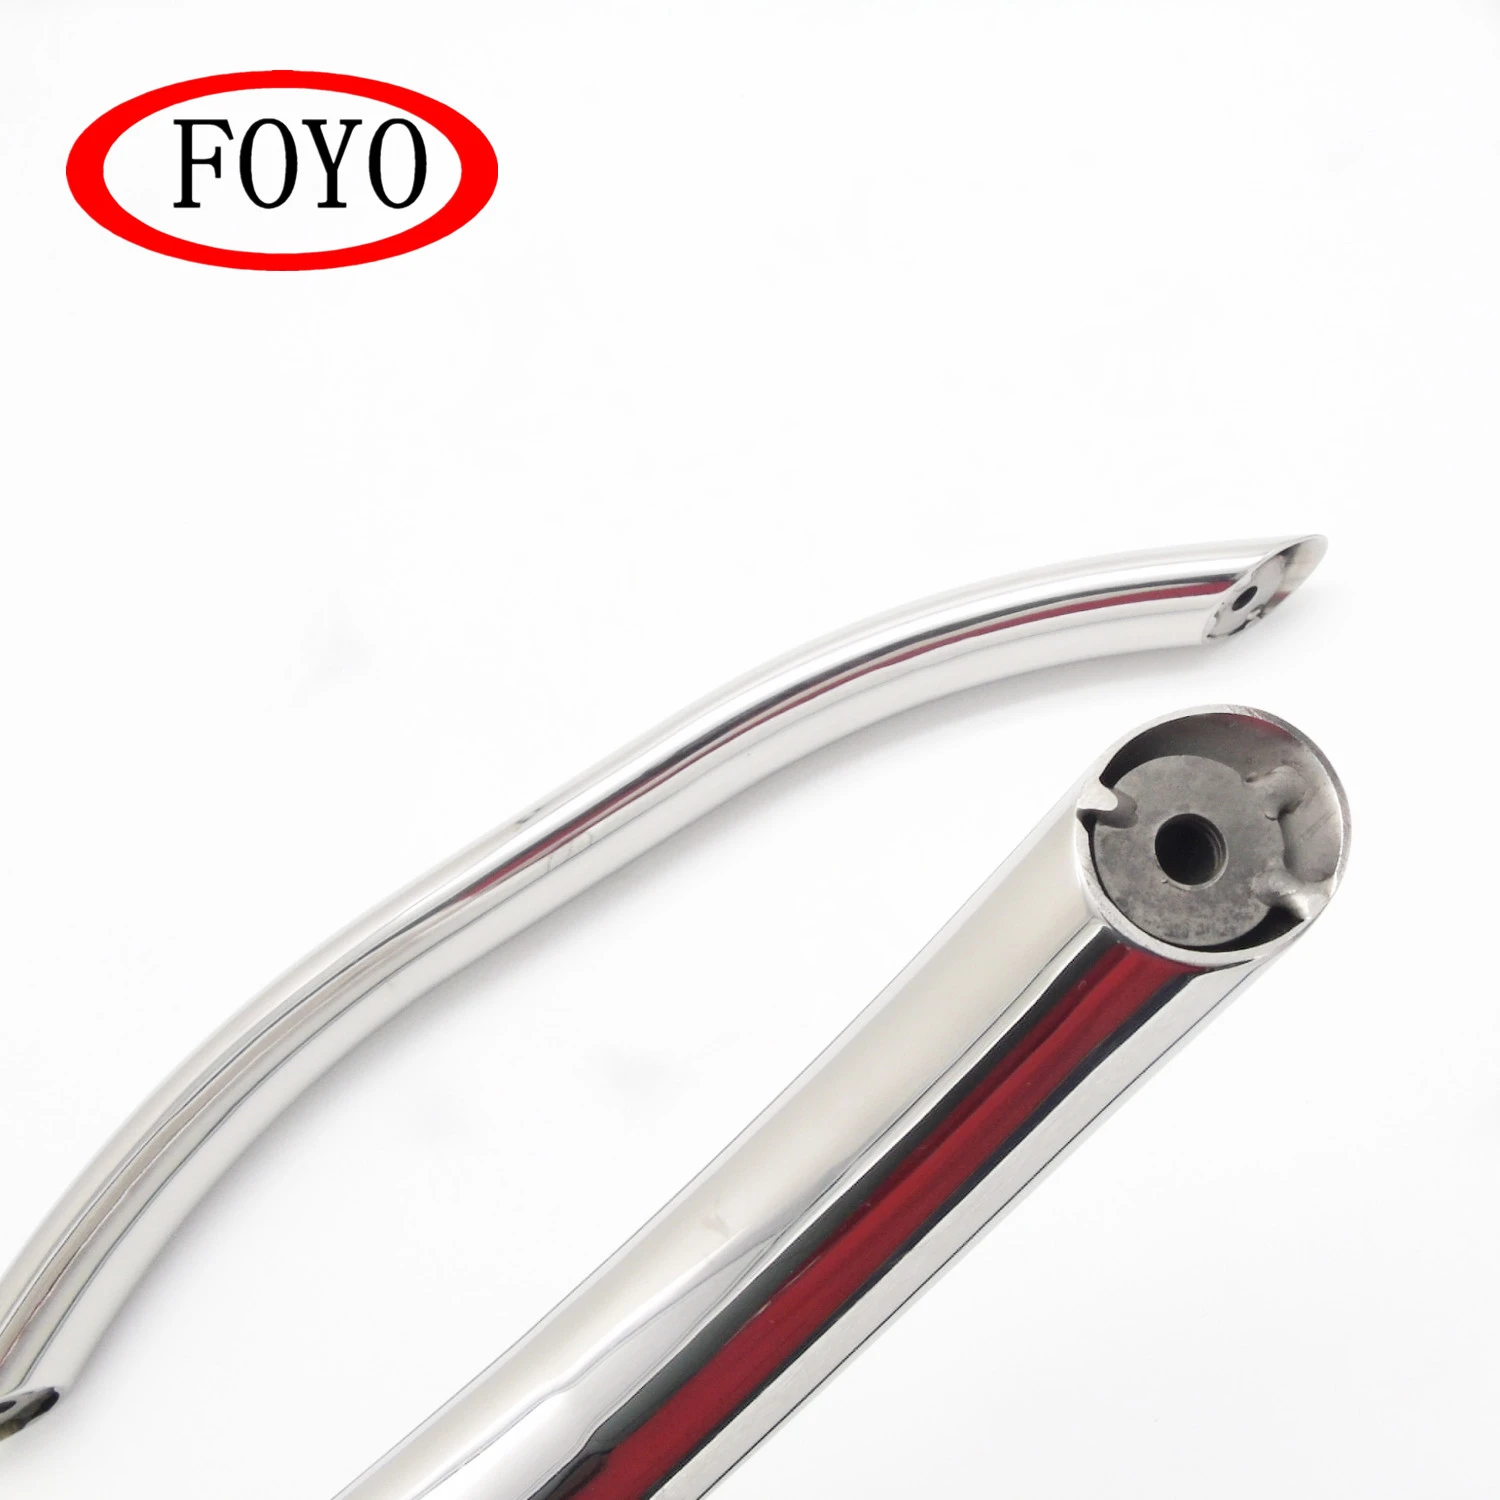 FOYO 24inch Marine Stainless Steel Handrail Grab Handle for Boat